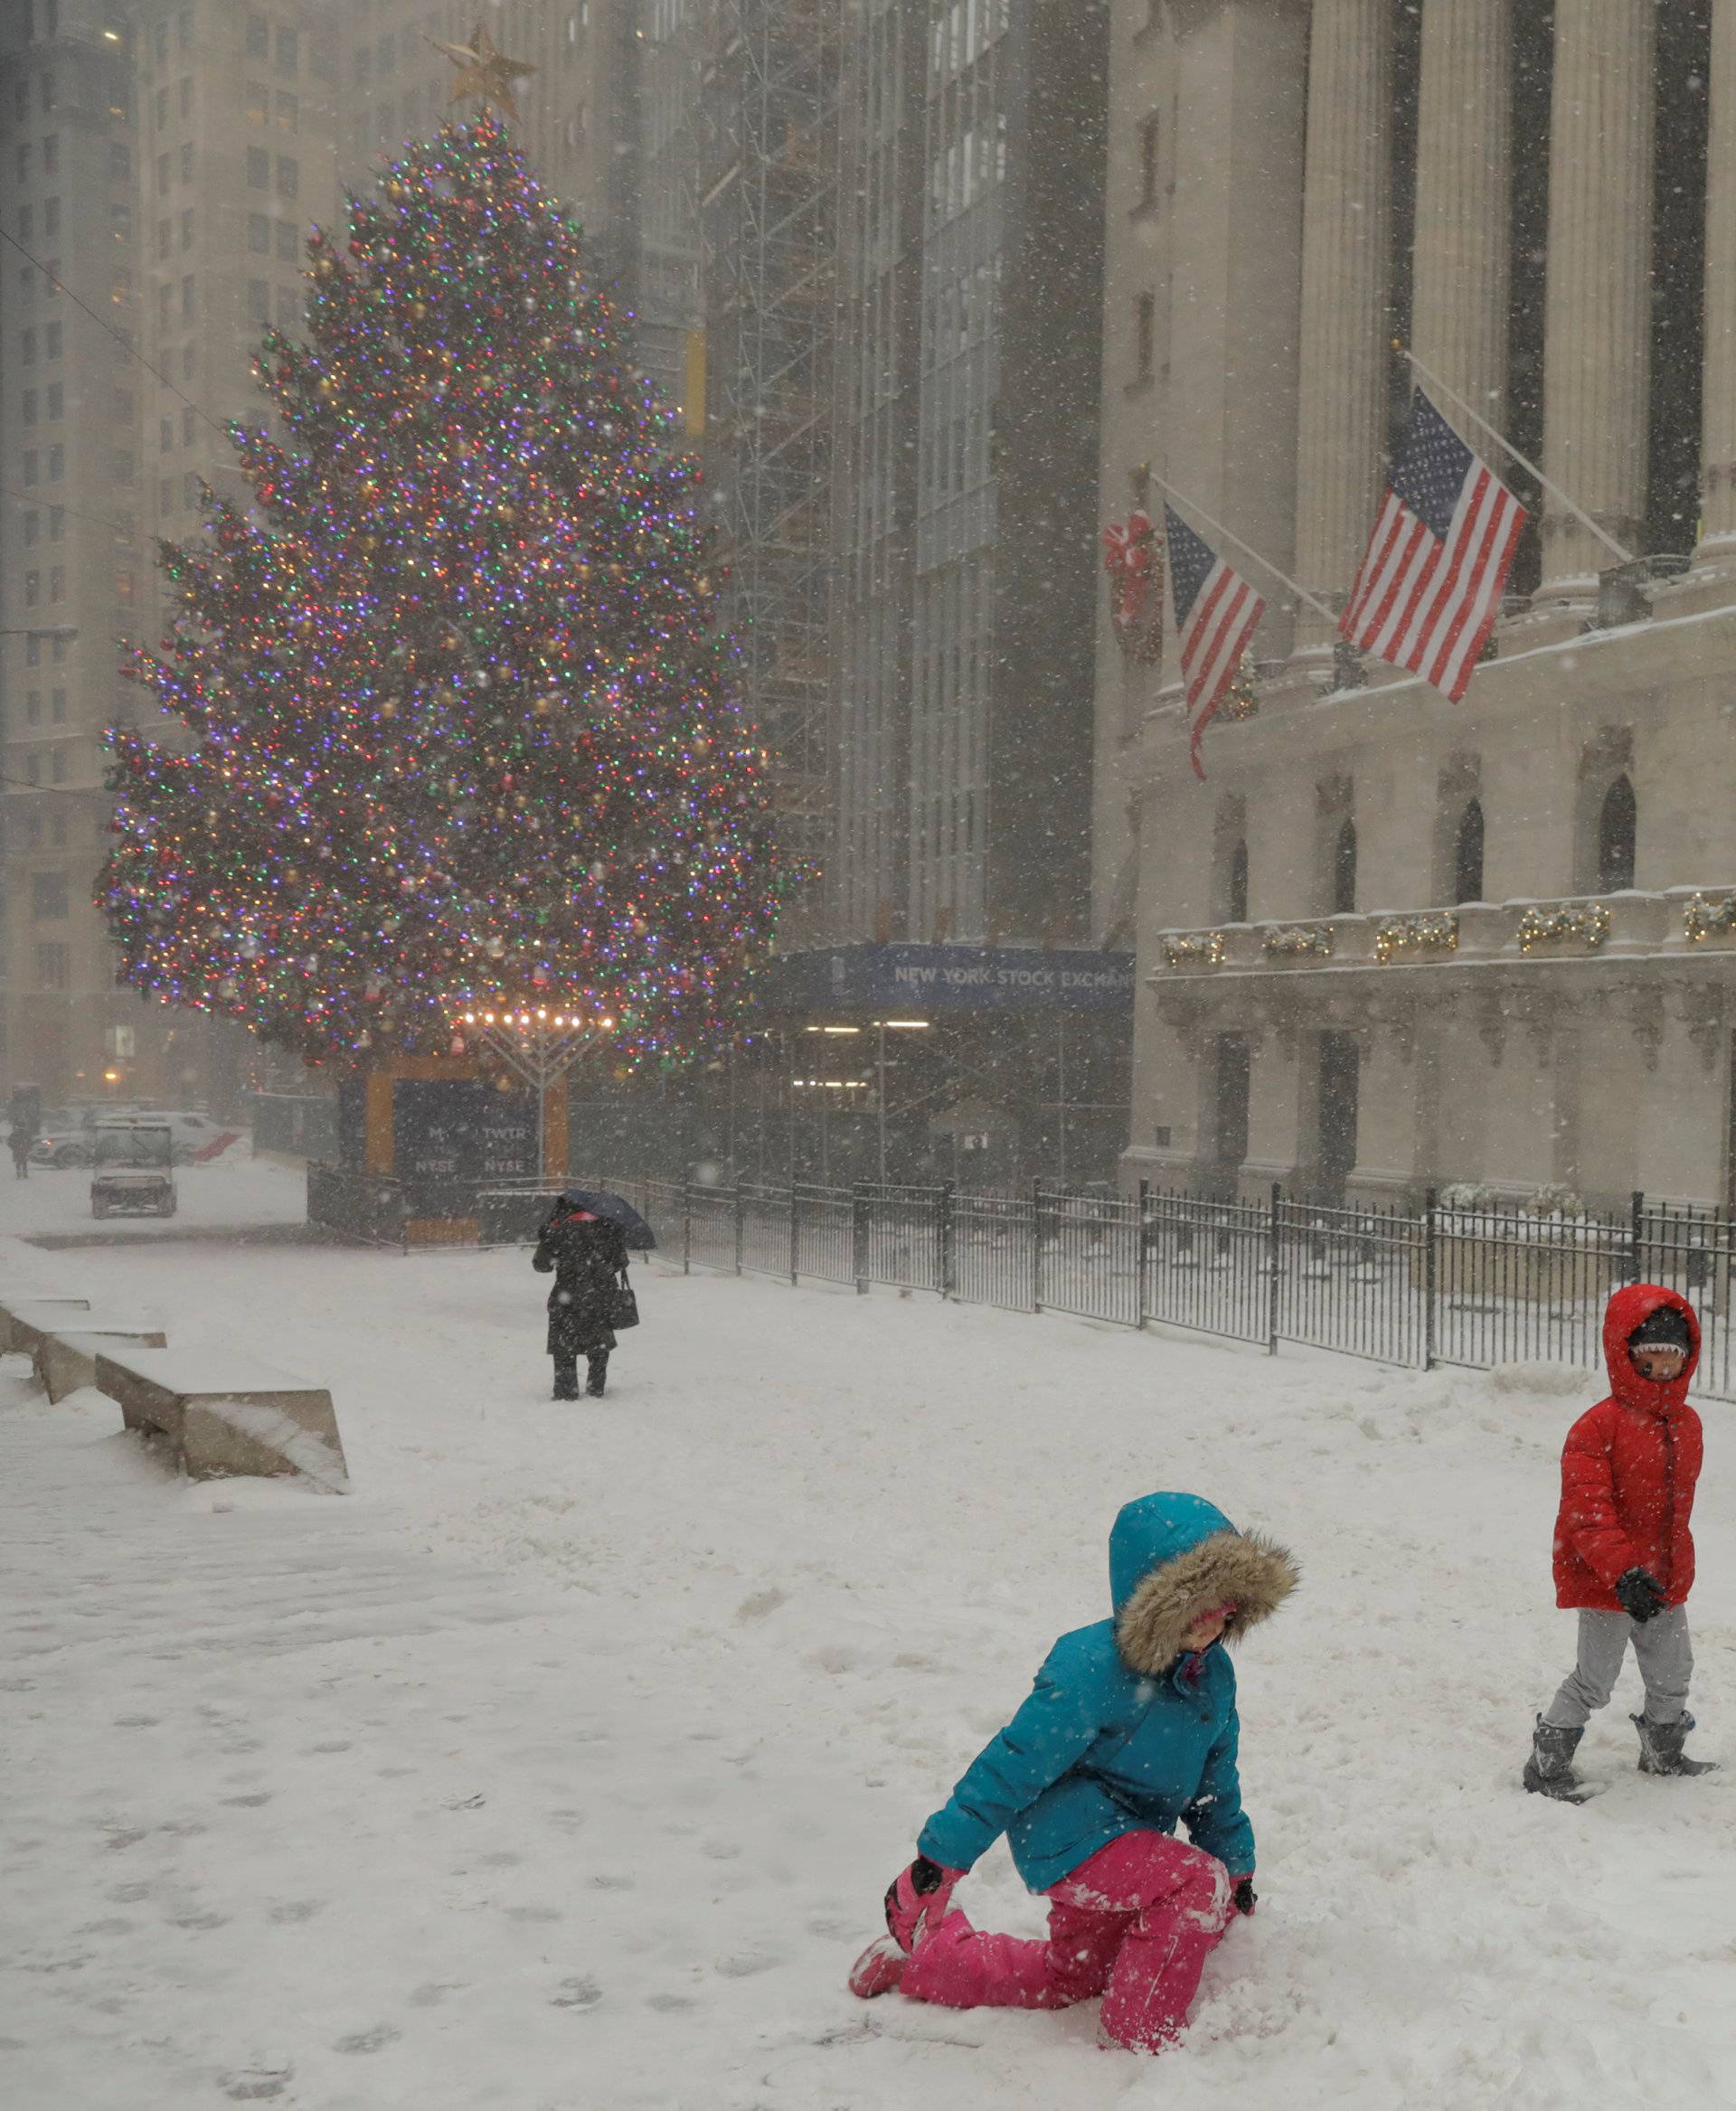 Children play in the snow in front of the New York Stock Exchange during a snowstorm in New York